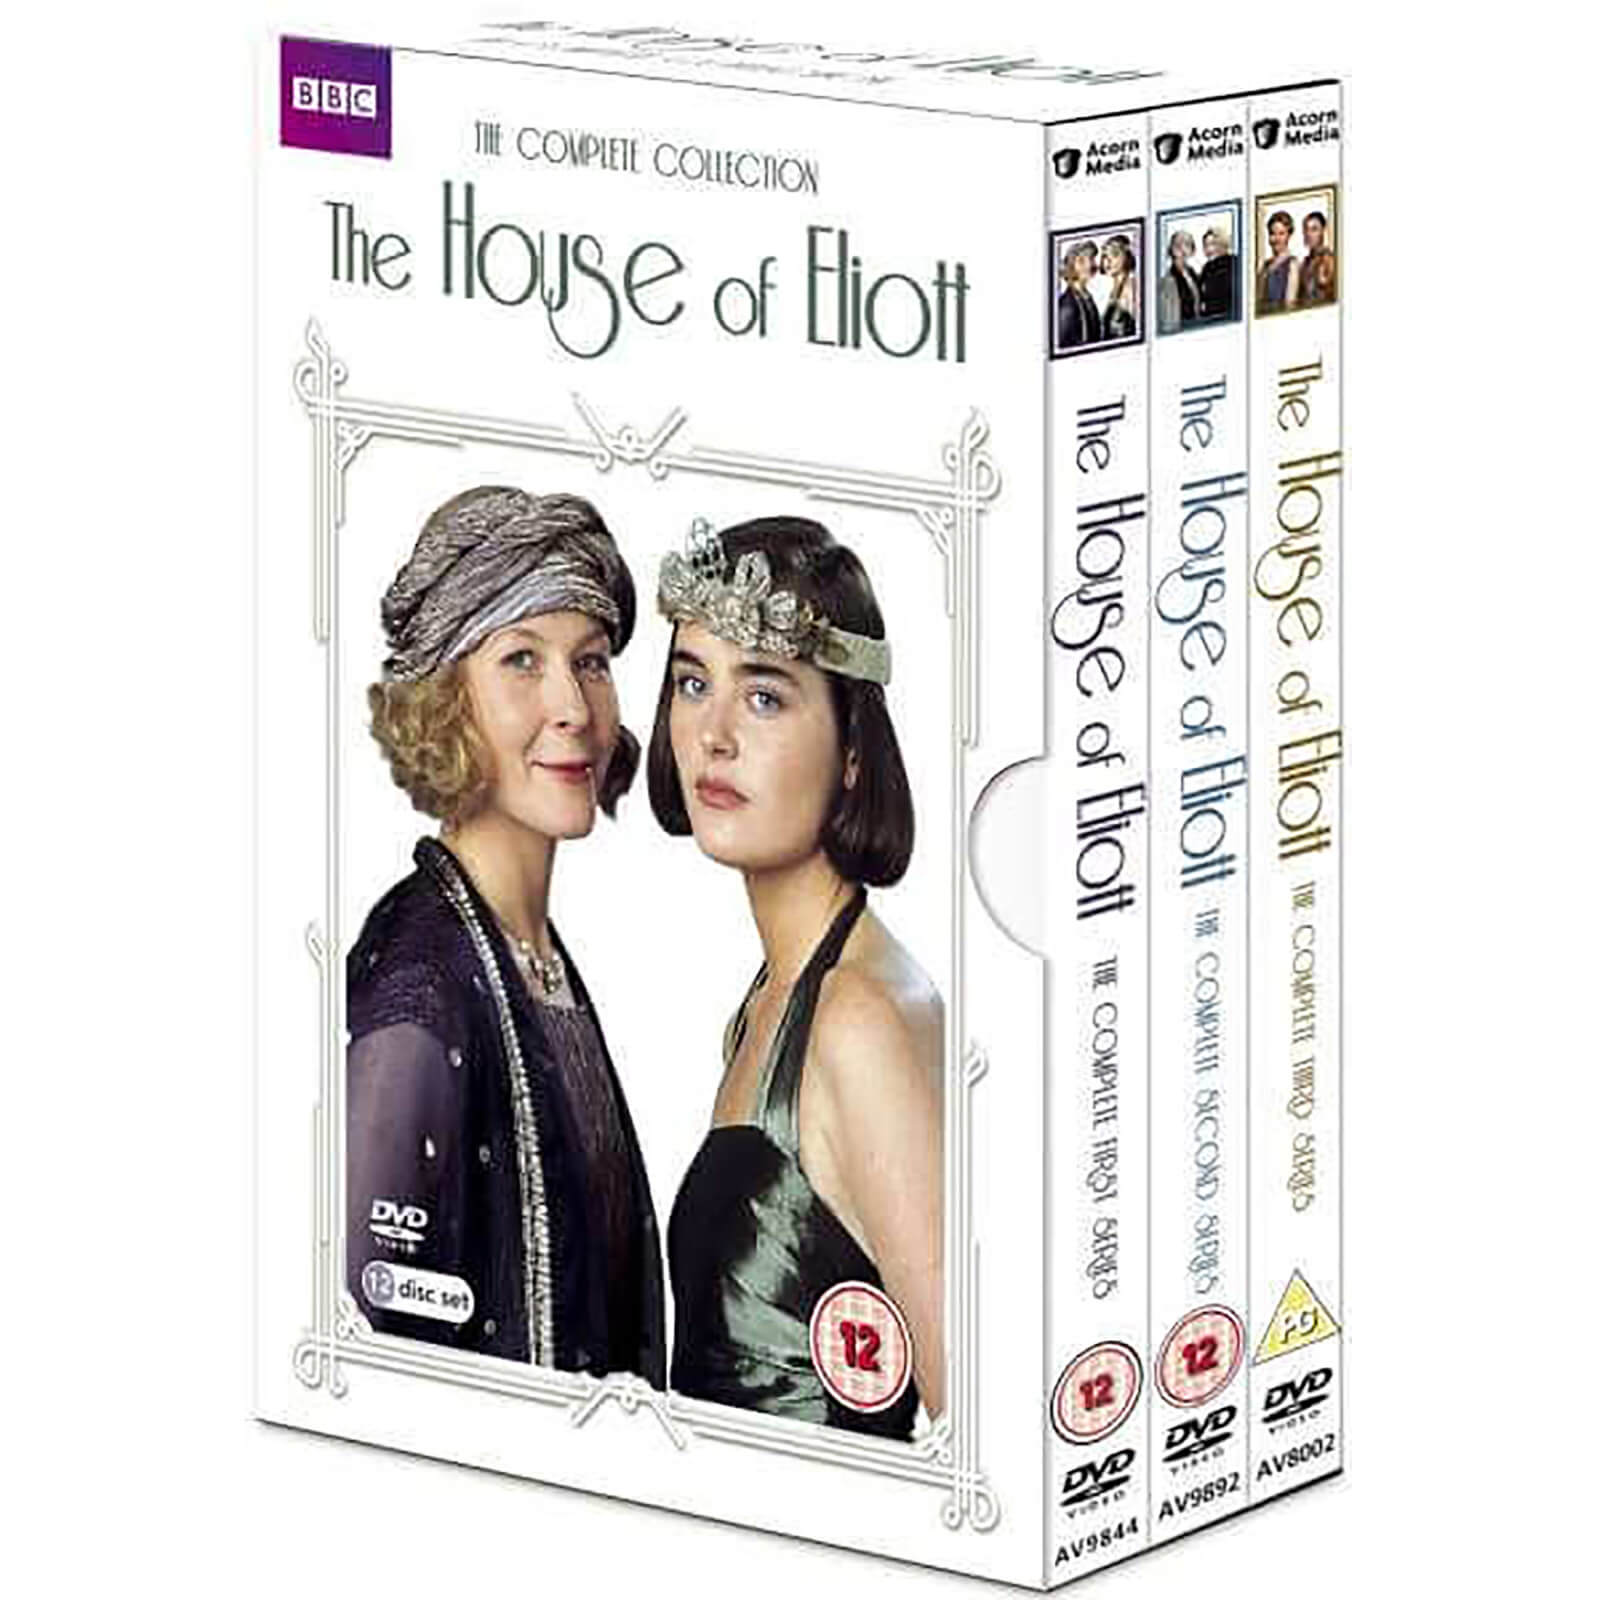 The House of Eliott - Complete Boxed Set